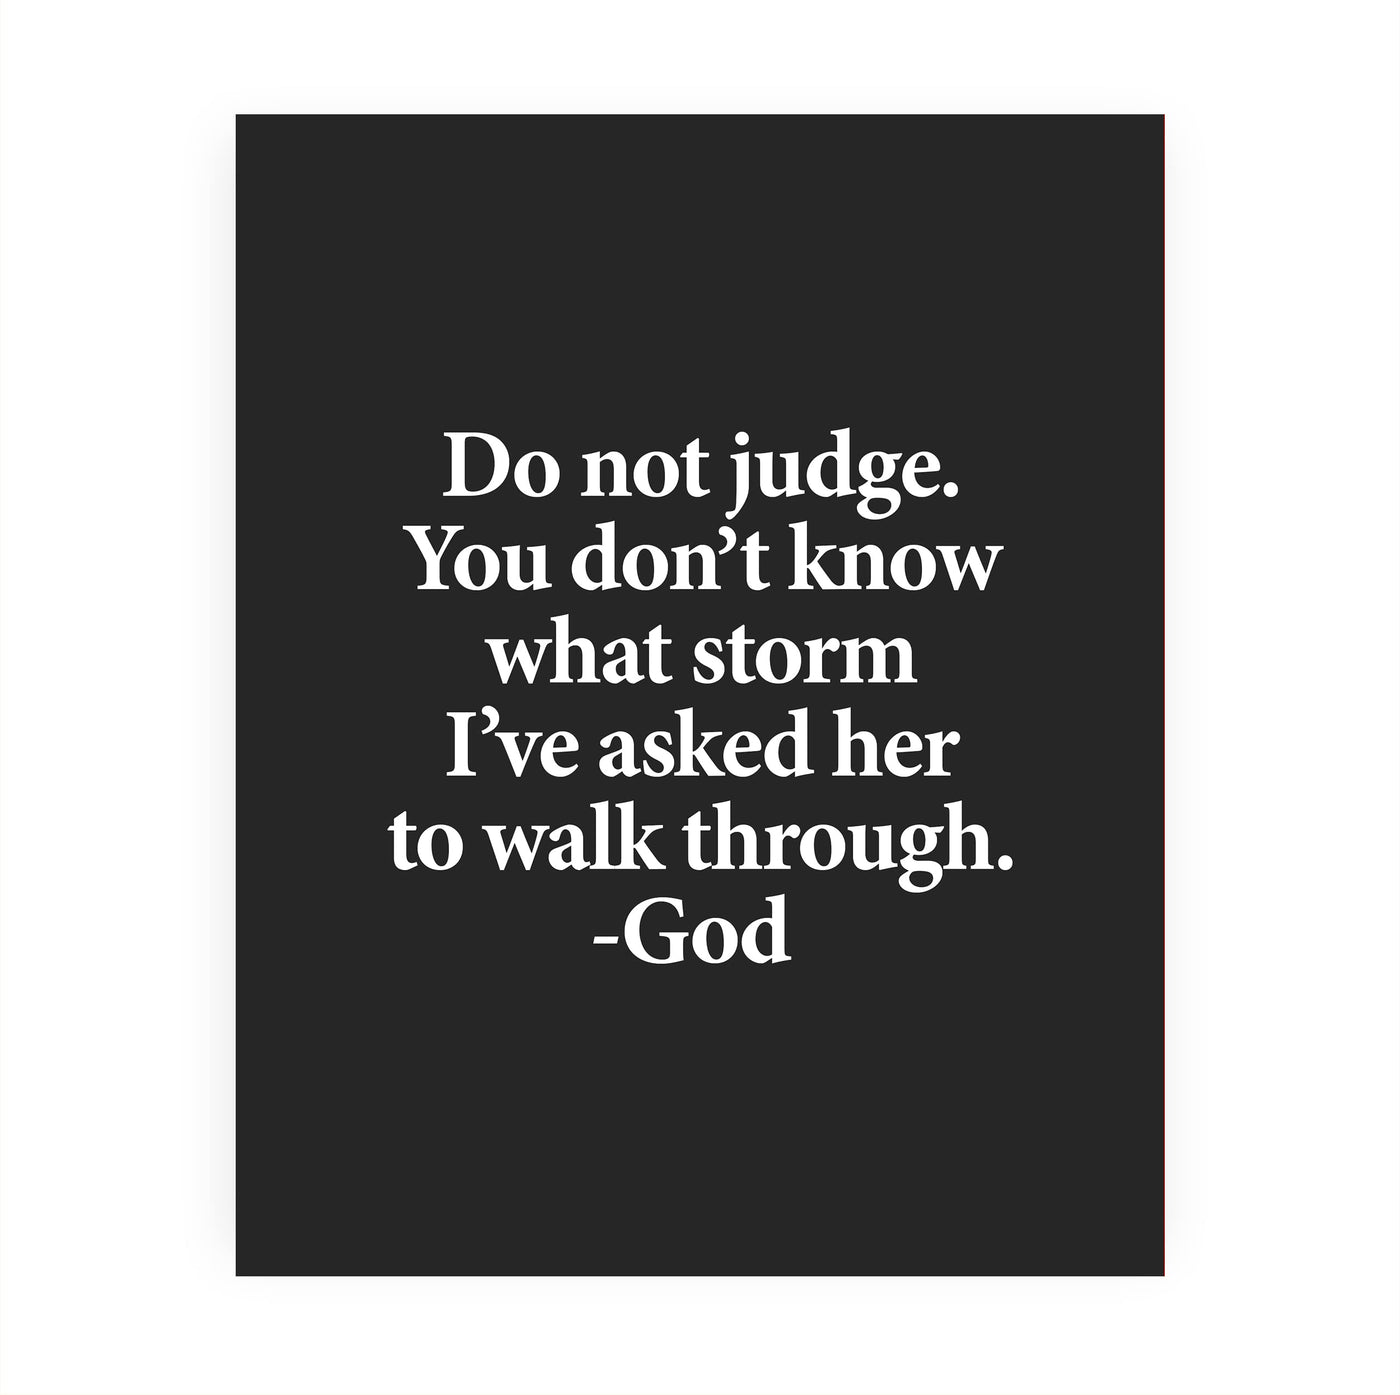 Don't Know What Storms I've Asked Her to Go Through -God Inspirational Quotes Wall Art -8x10" Typographic Christian Print -Ready to Frame. Motivational Home-Office-Church Decor. Reminder of Grace!